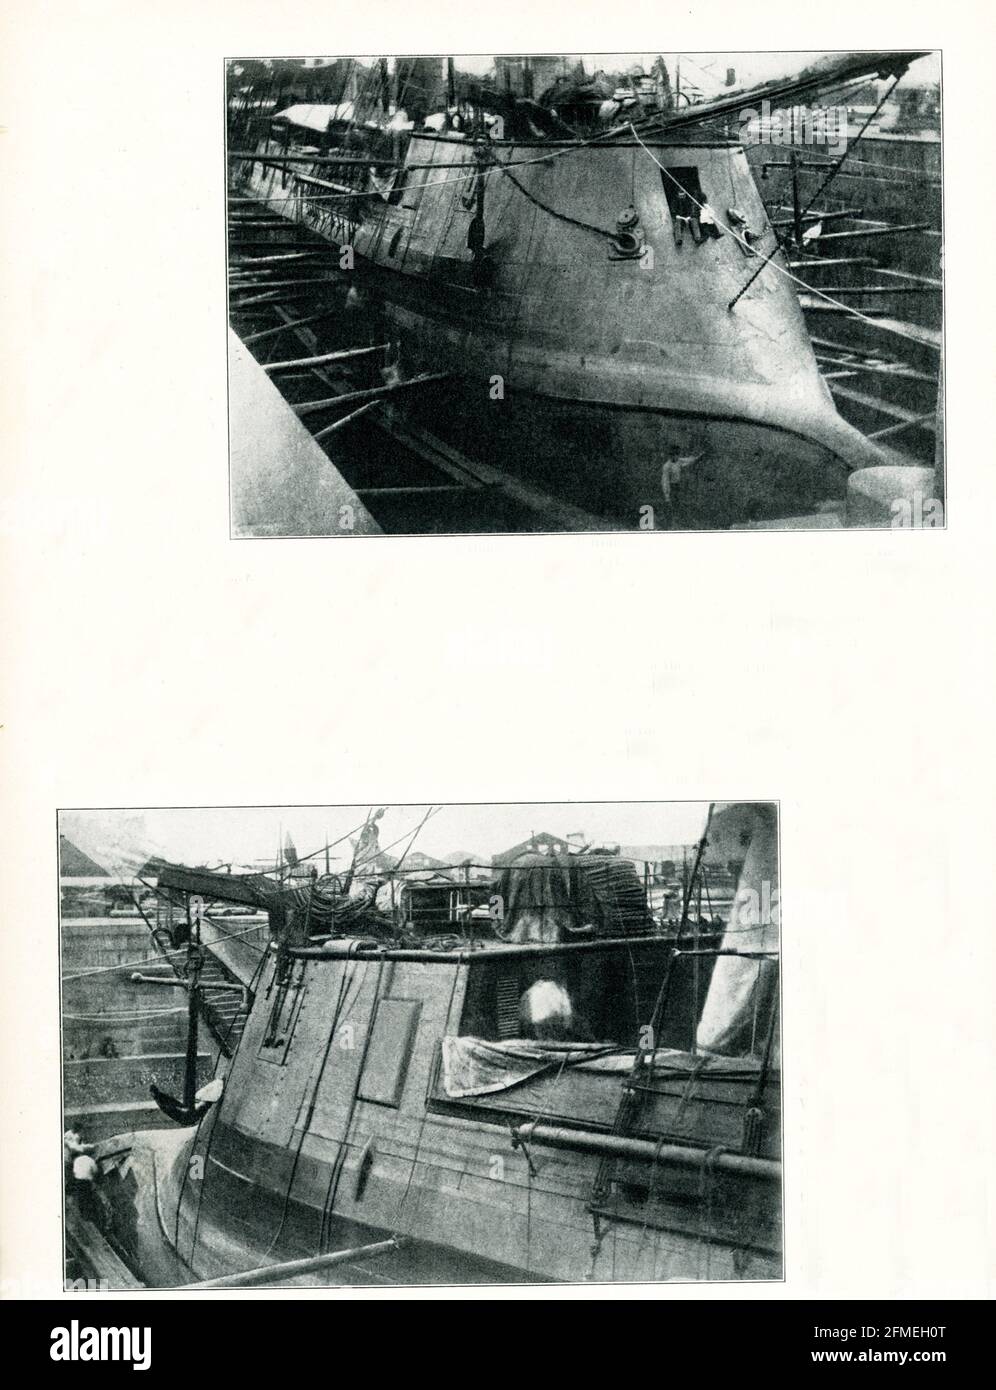 Pictured here is the Confederate ram Stonewall - two views of ship in dry-dock in Port Royal on the Rappahannock River in Virginia. It sailed from Copenhagen on January 6, 1865. Stonewall' was built by Lucien Arman Brothers in France in 1863-64 for the Confederate States Government. However, the French authorities refused to permit her delivery, following strong protests by American Ministers, Dayton and Bigelow. The vessel was eventually sold to Denmark via a Swedish intermediary, for use in the Schleswig-Holstein War. Because of delays, shortcomings in her design and the fact that due to pro Stock Photo